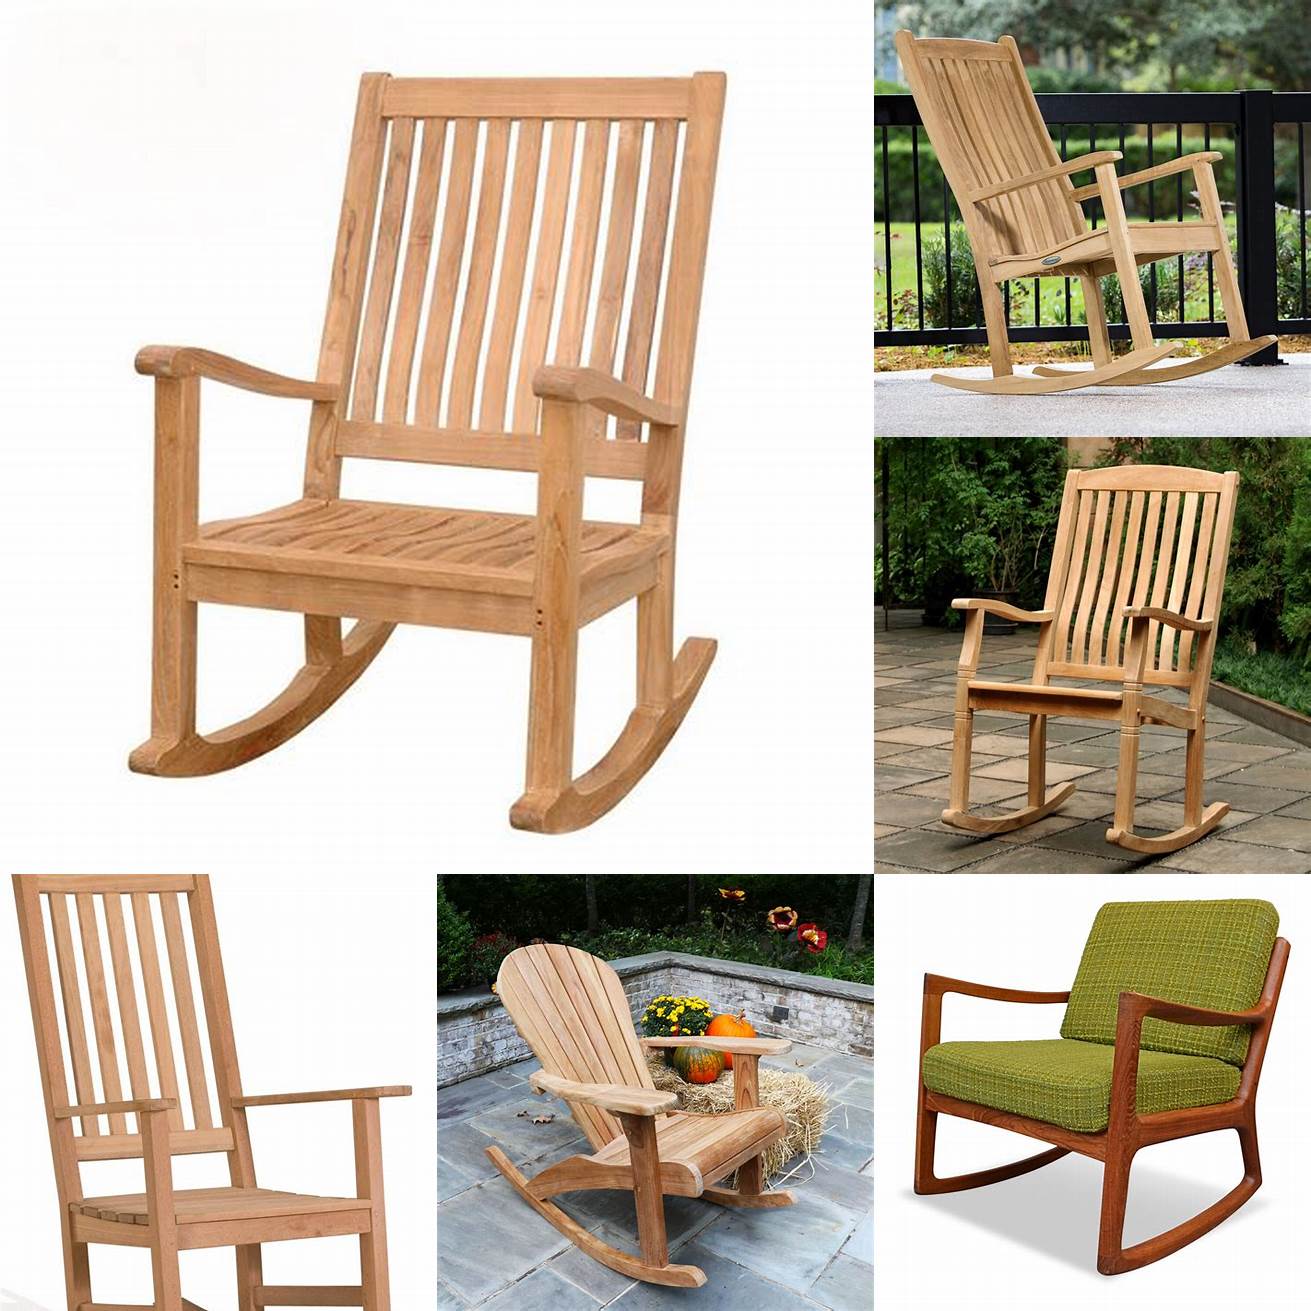 A picture of a teak rocking chair in its natural state